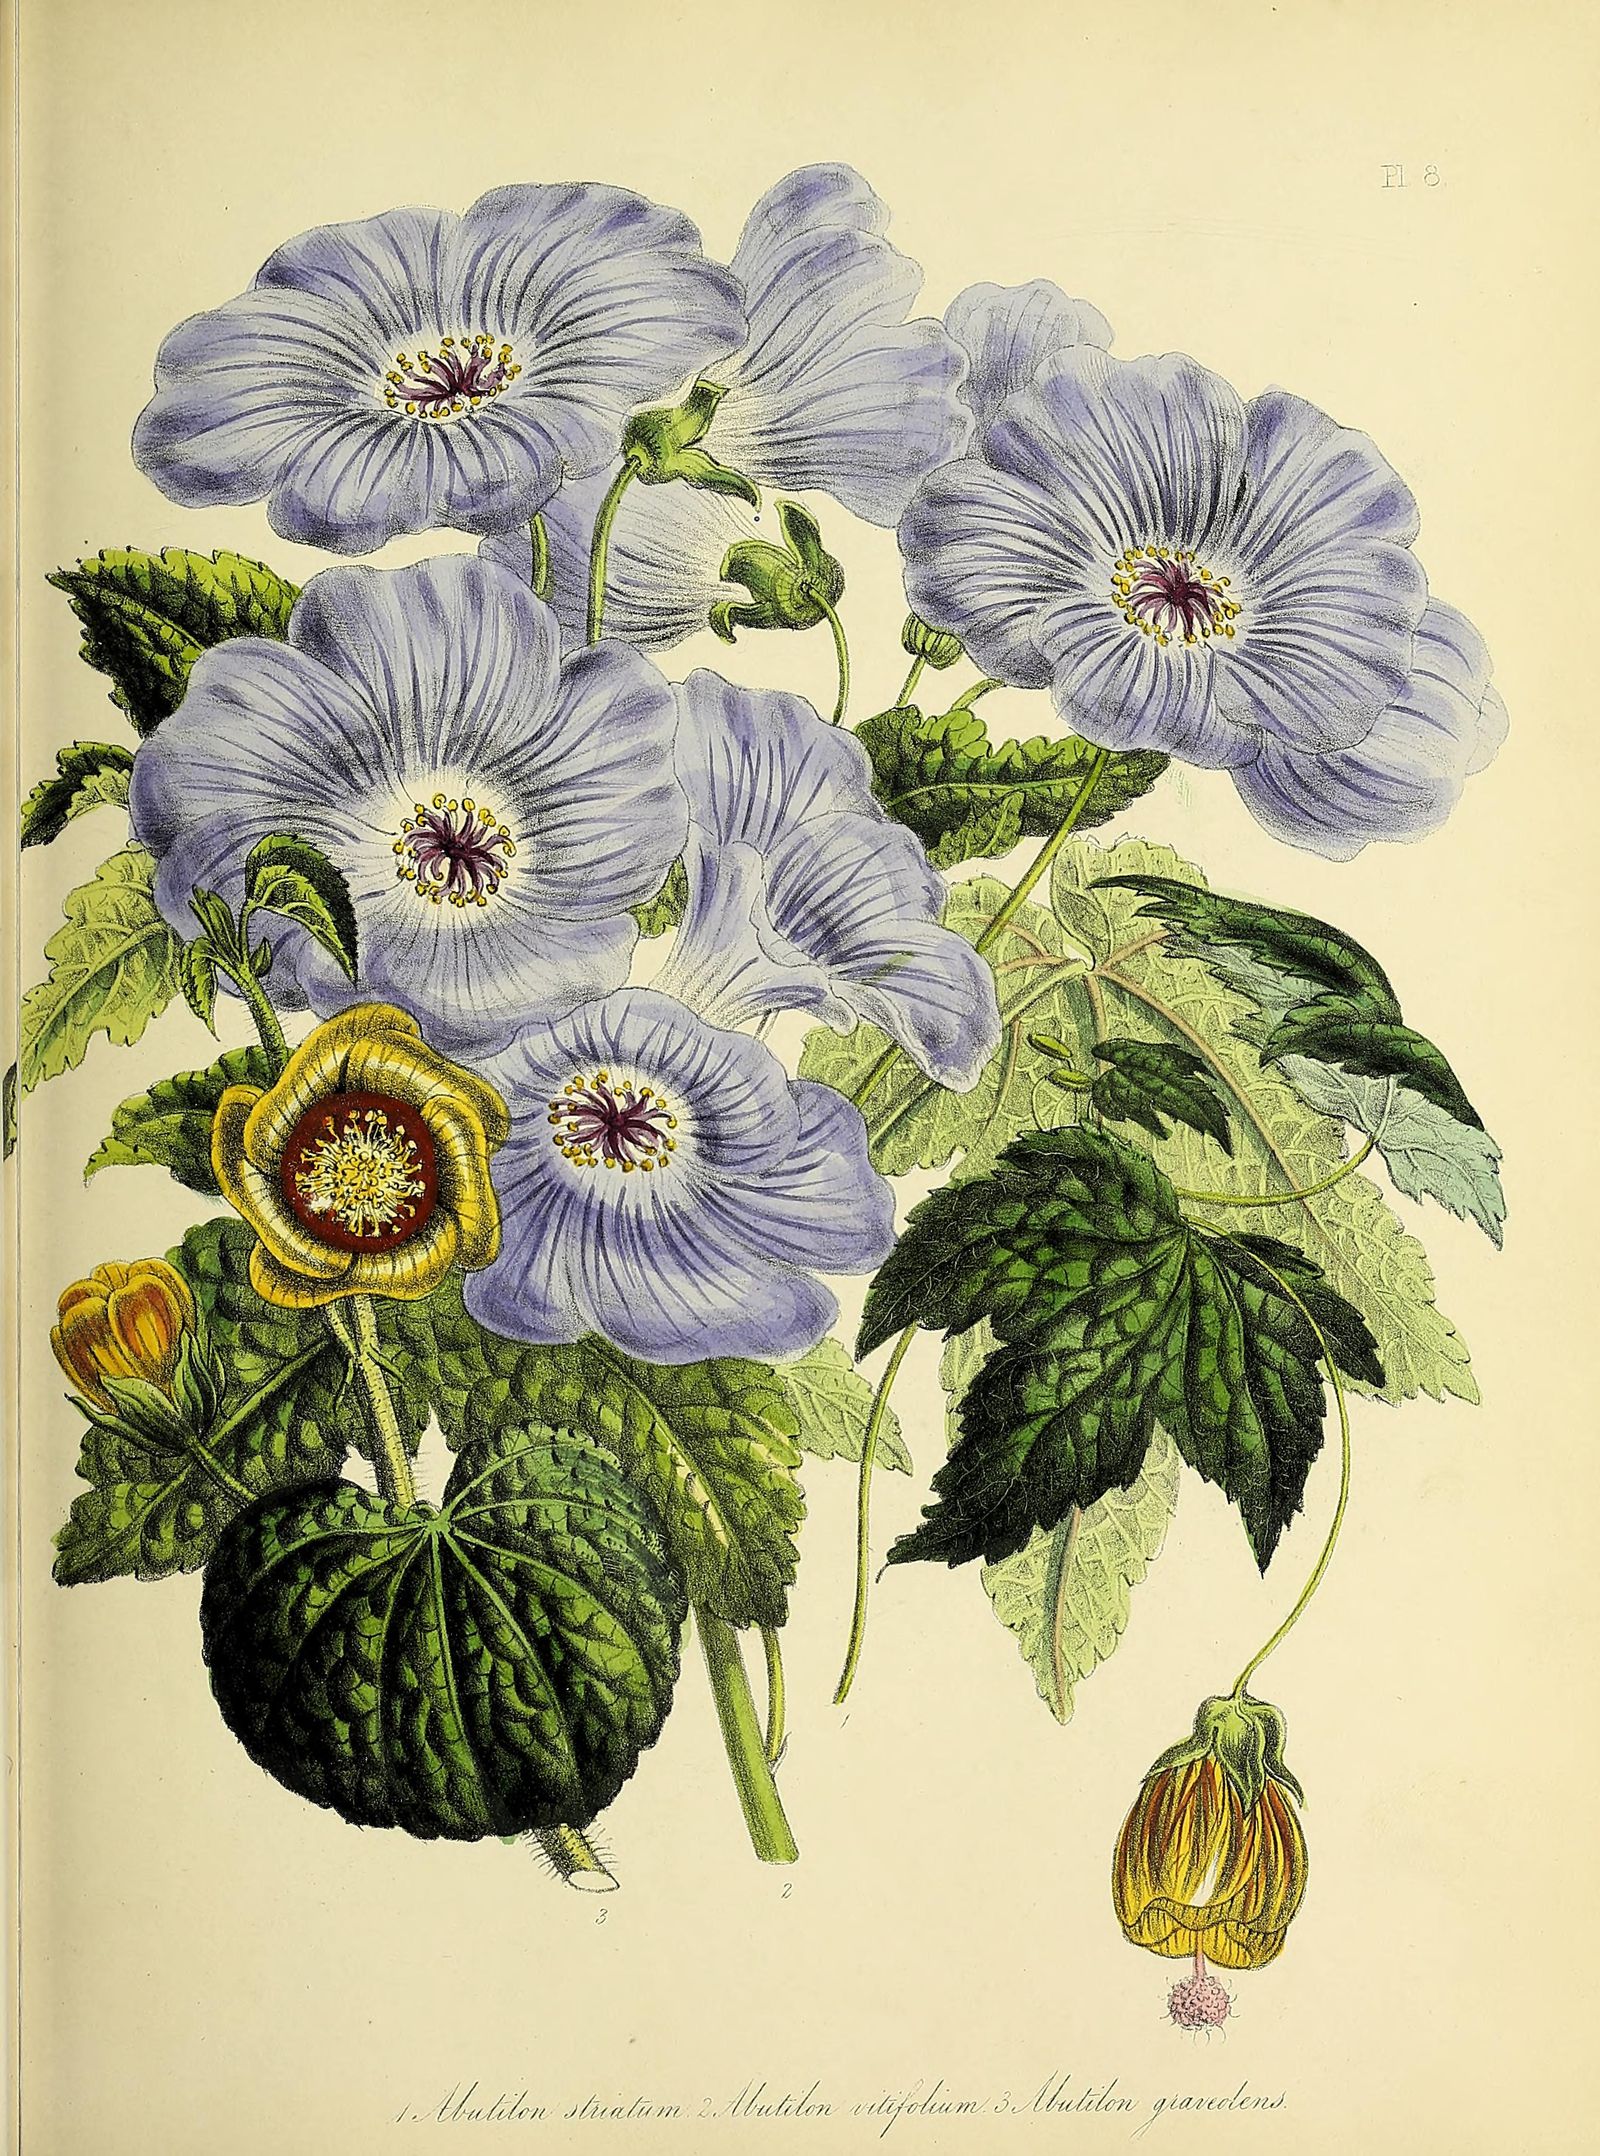 A Botanical Wonderland Resides in the World of Rare and Unusual Books